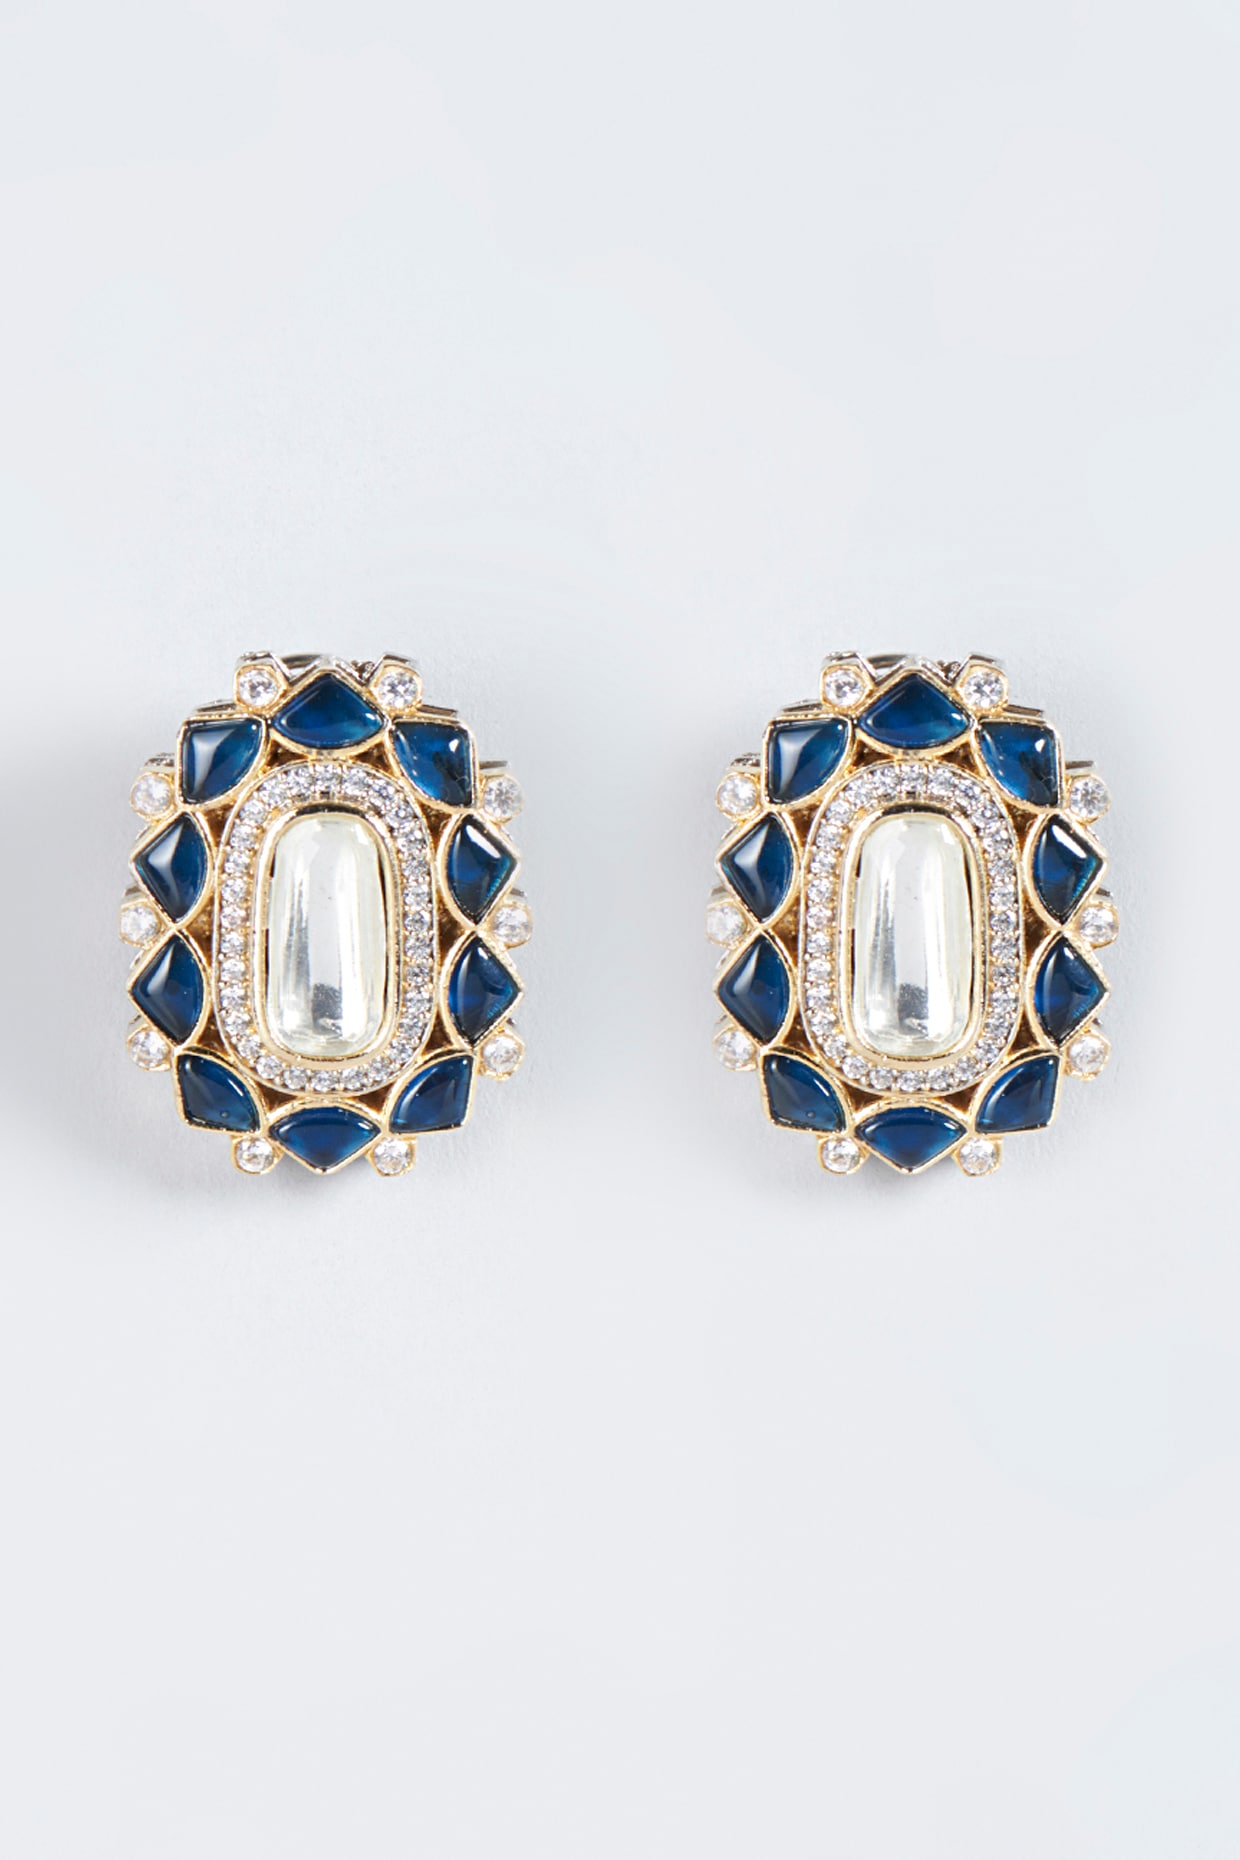 Buy Rich  Famous Blue Stone Gold Pleted Round Shape Stud Earrings For  Women And Girls Online at Best Prices in India  JioMart